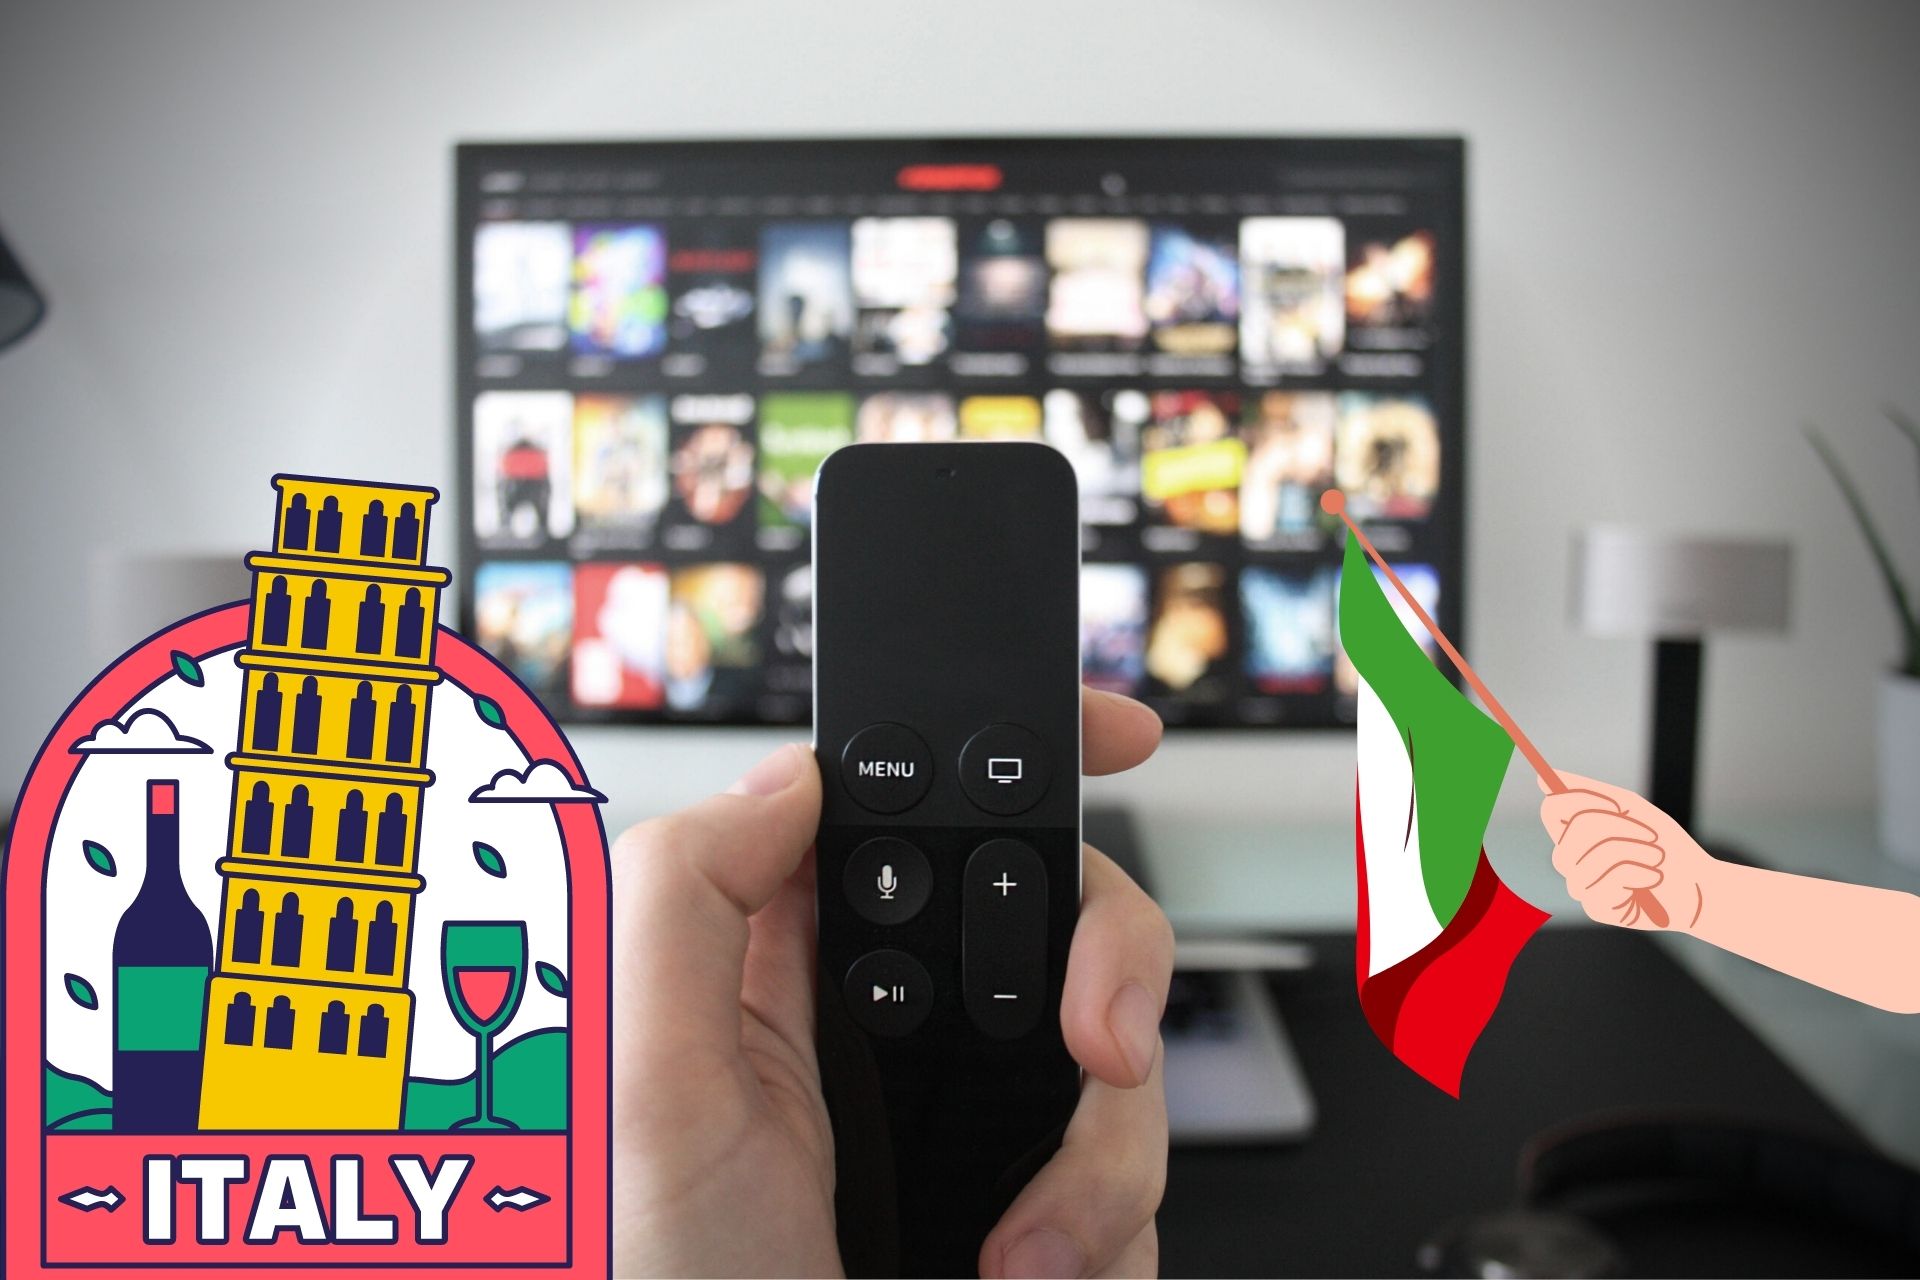 How to watch Italian TV in USA